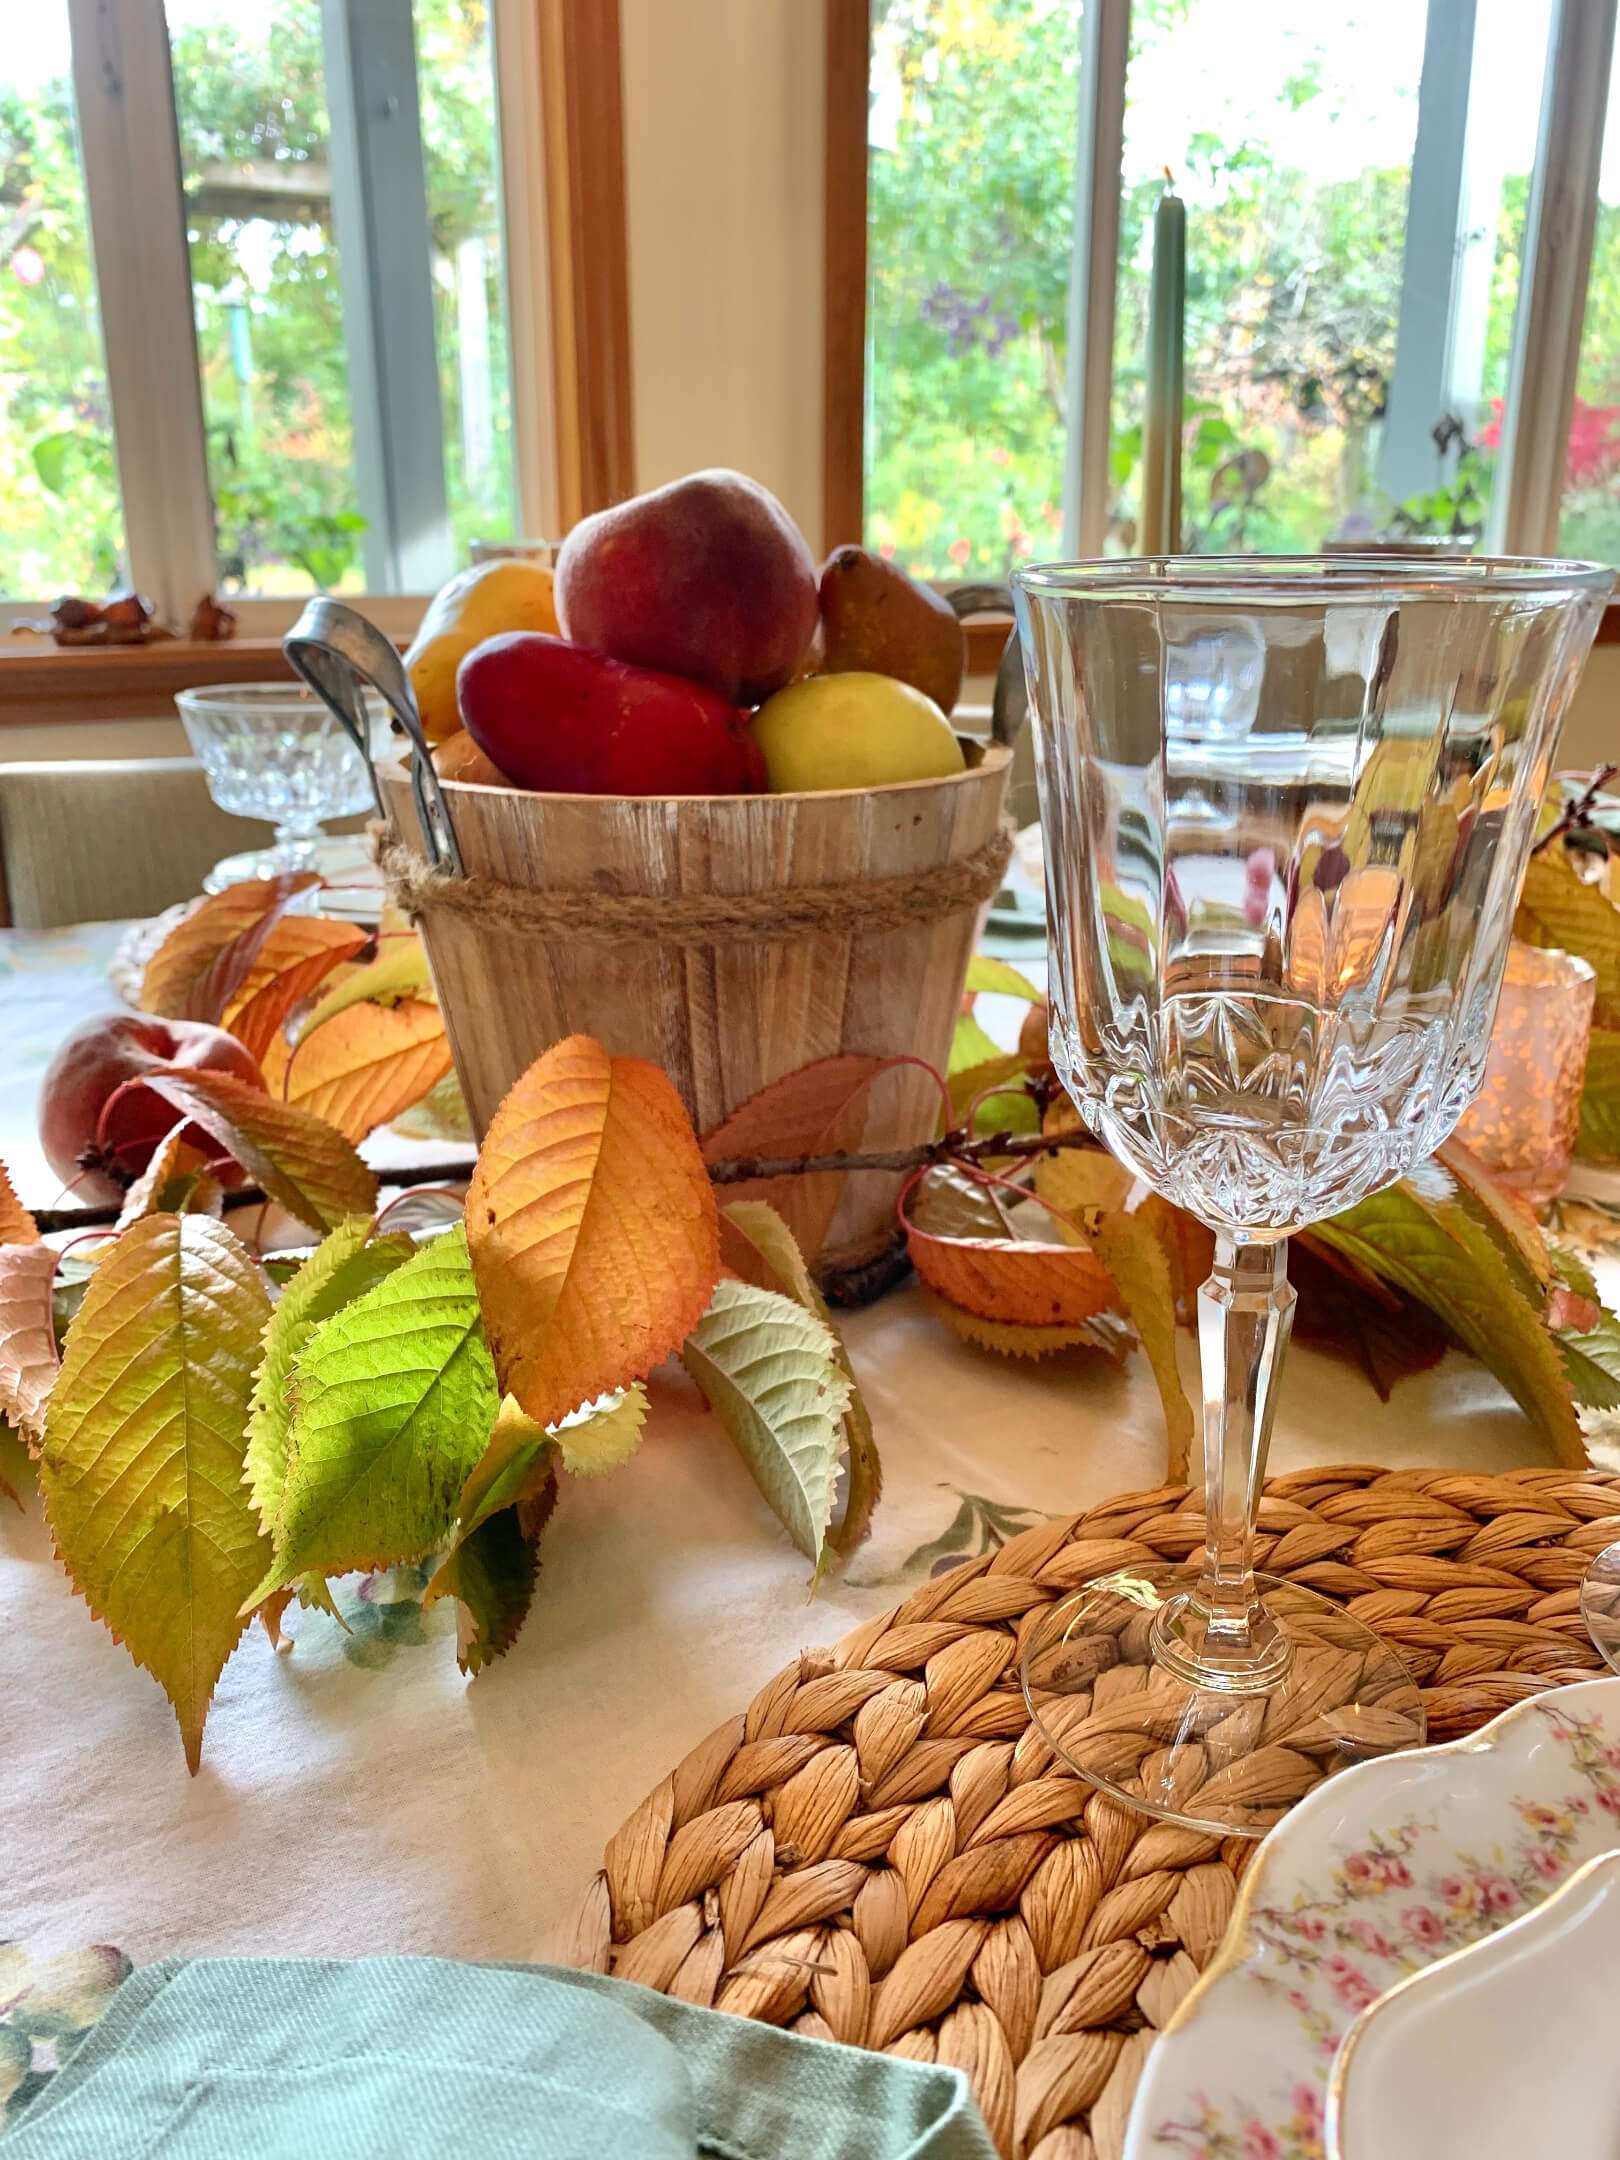 Autumnal table set up with wicker placemats, clear glassware with leaves and fruit for decoration